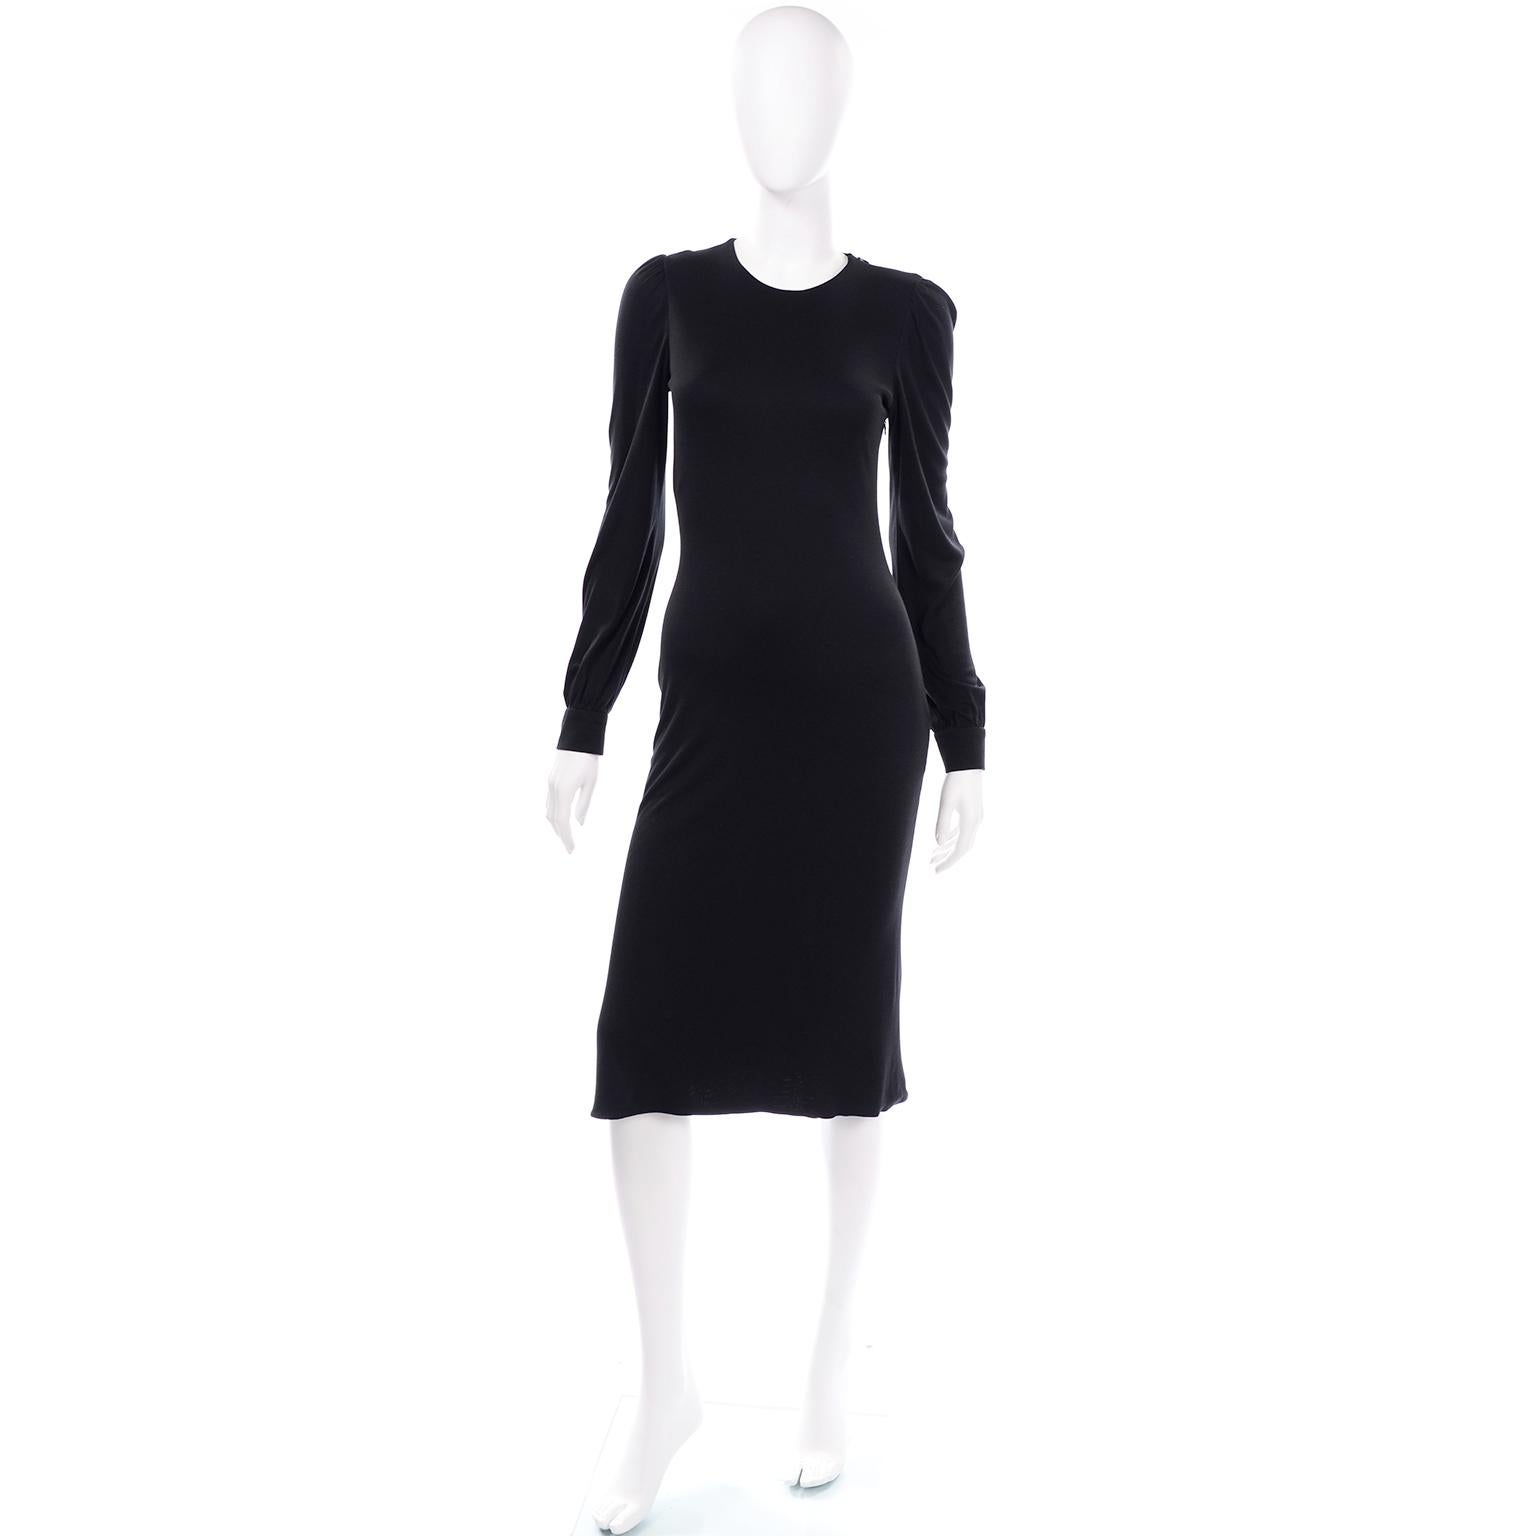 Alexander McQueen Black Dress With Low Lace Back 2005 The Man Who Knew Too Much For Sale 3